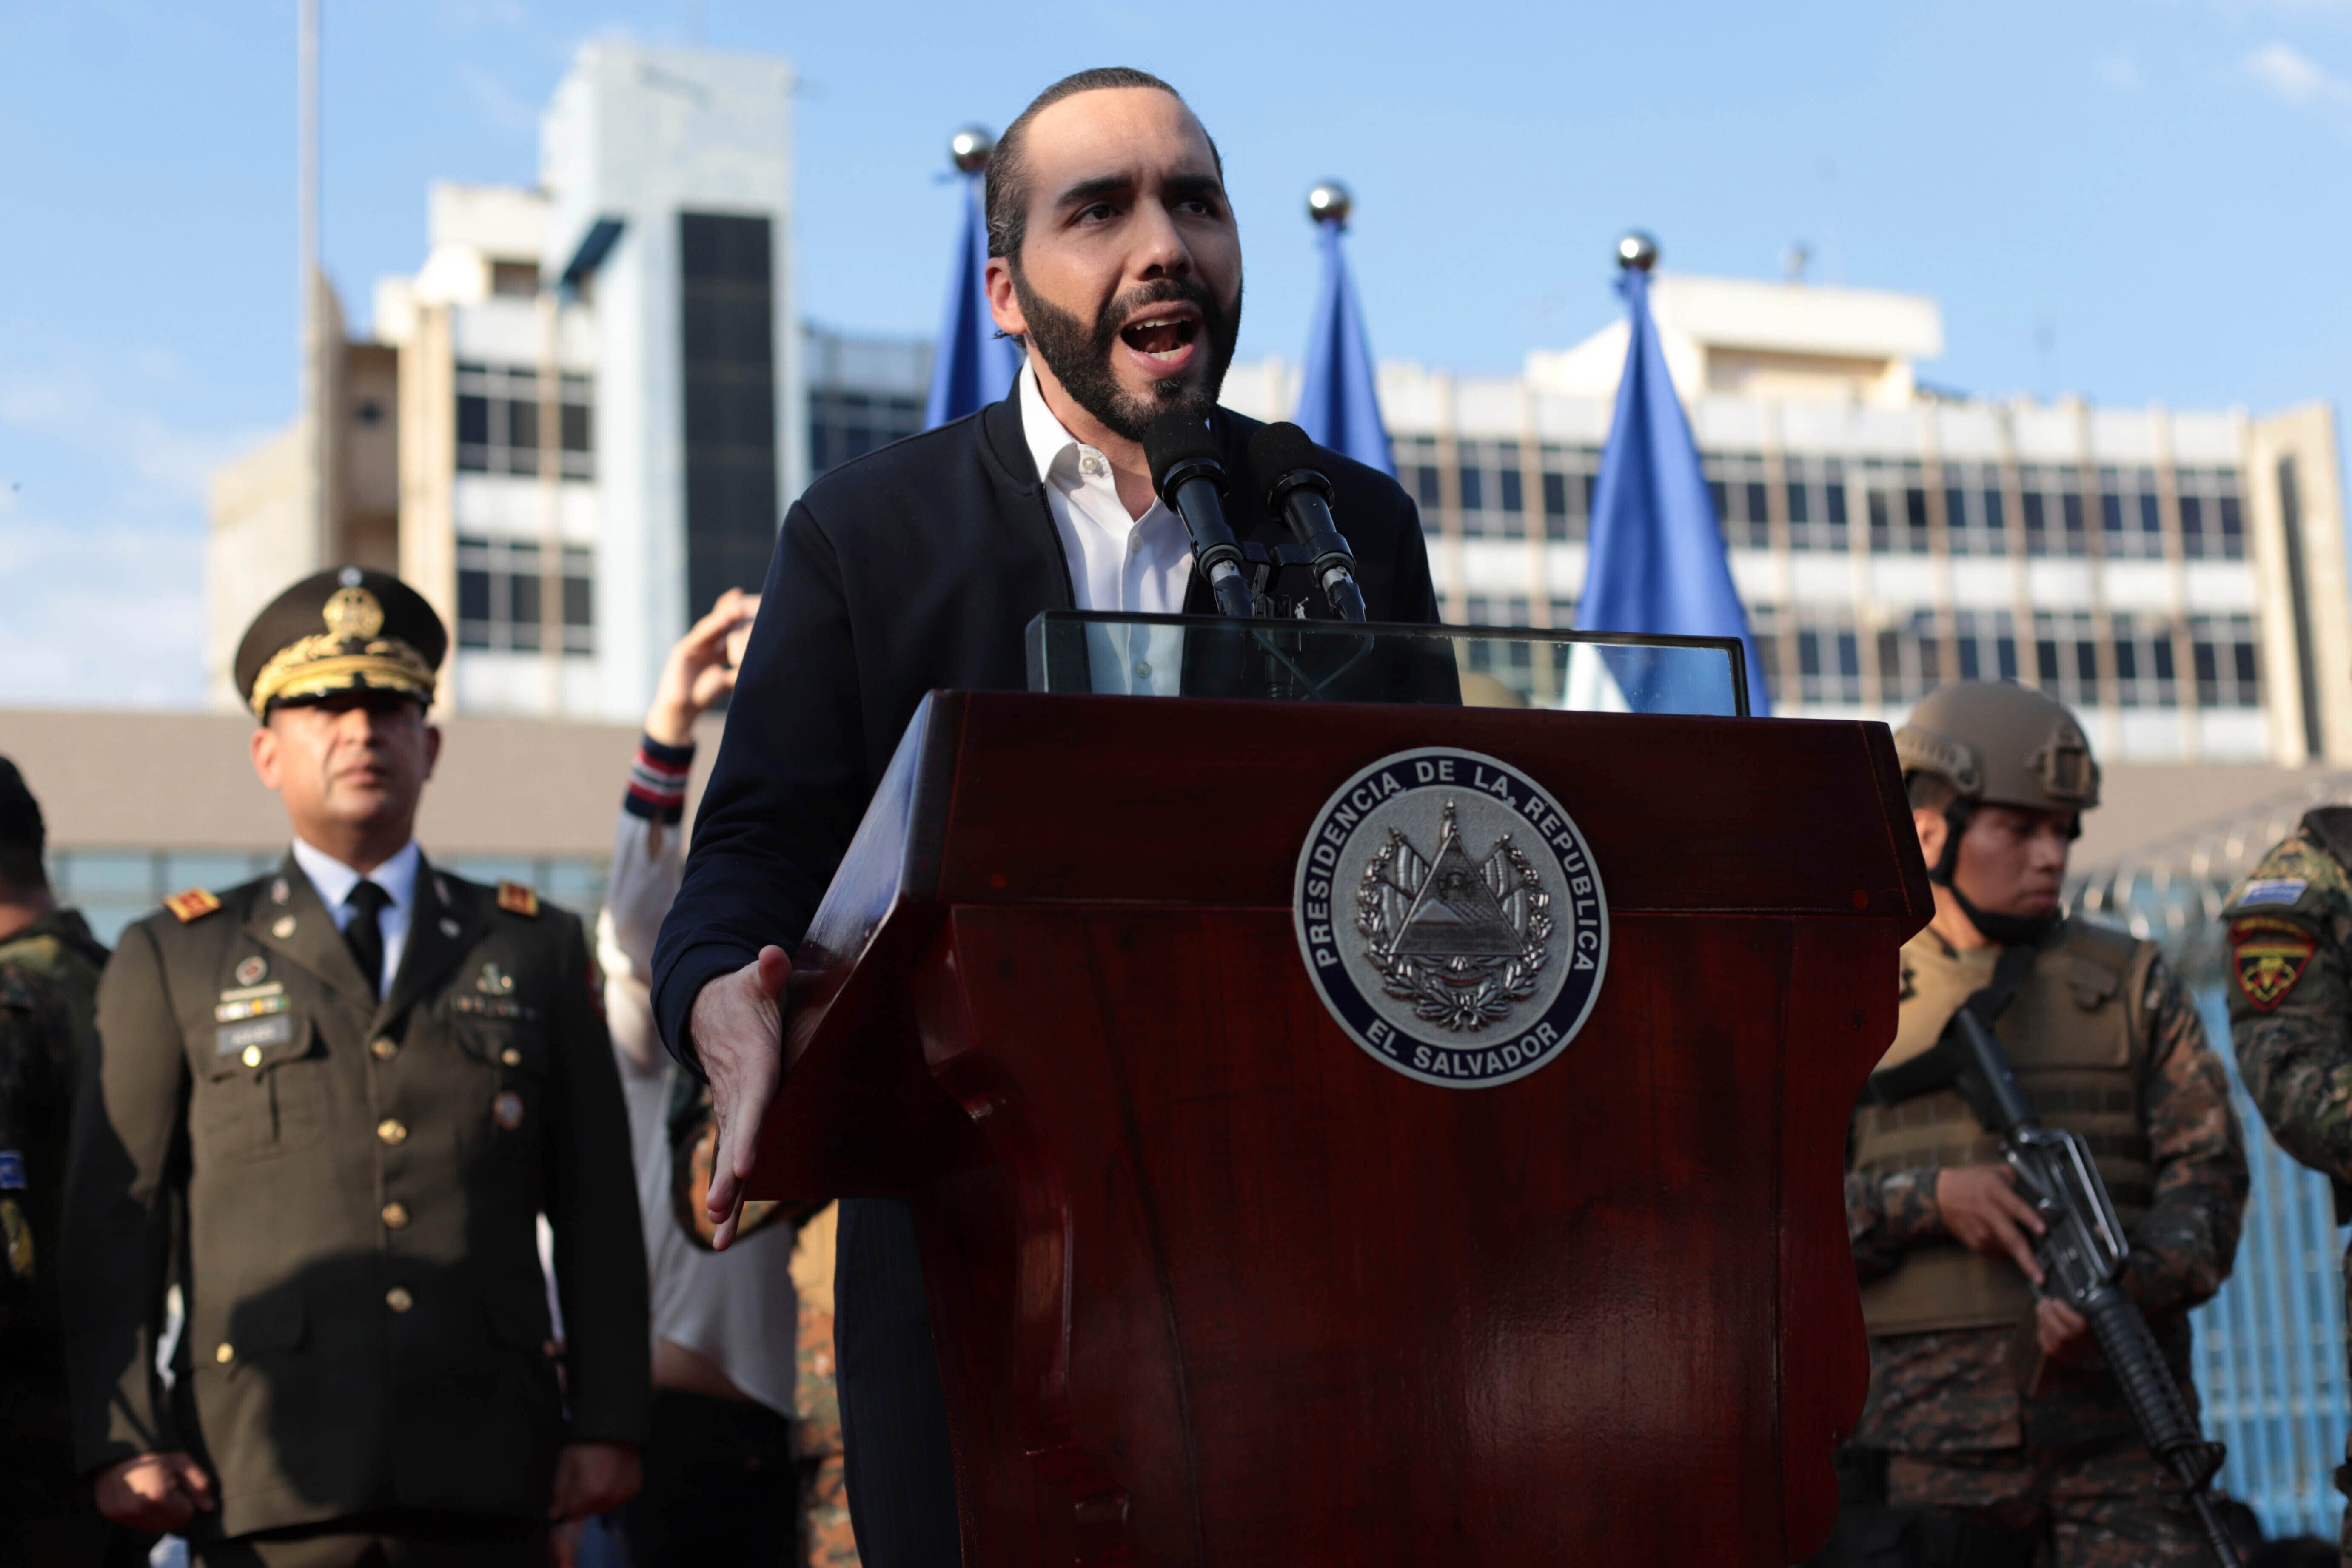 El Salvador's President Nayib Bukele, accompanied by members of the armed forces, speaks to his supporters outside Congress in San Salvador, El Salvador.